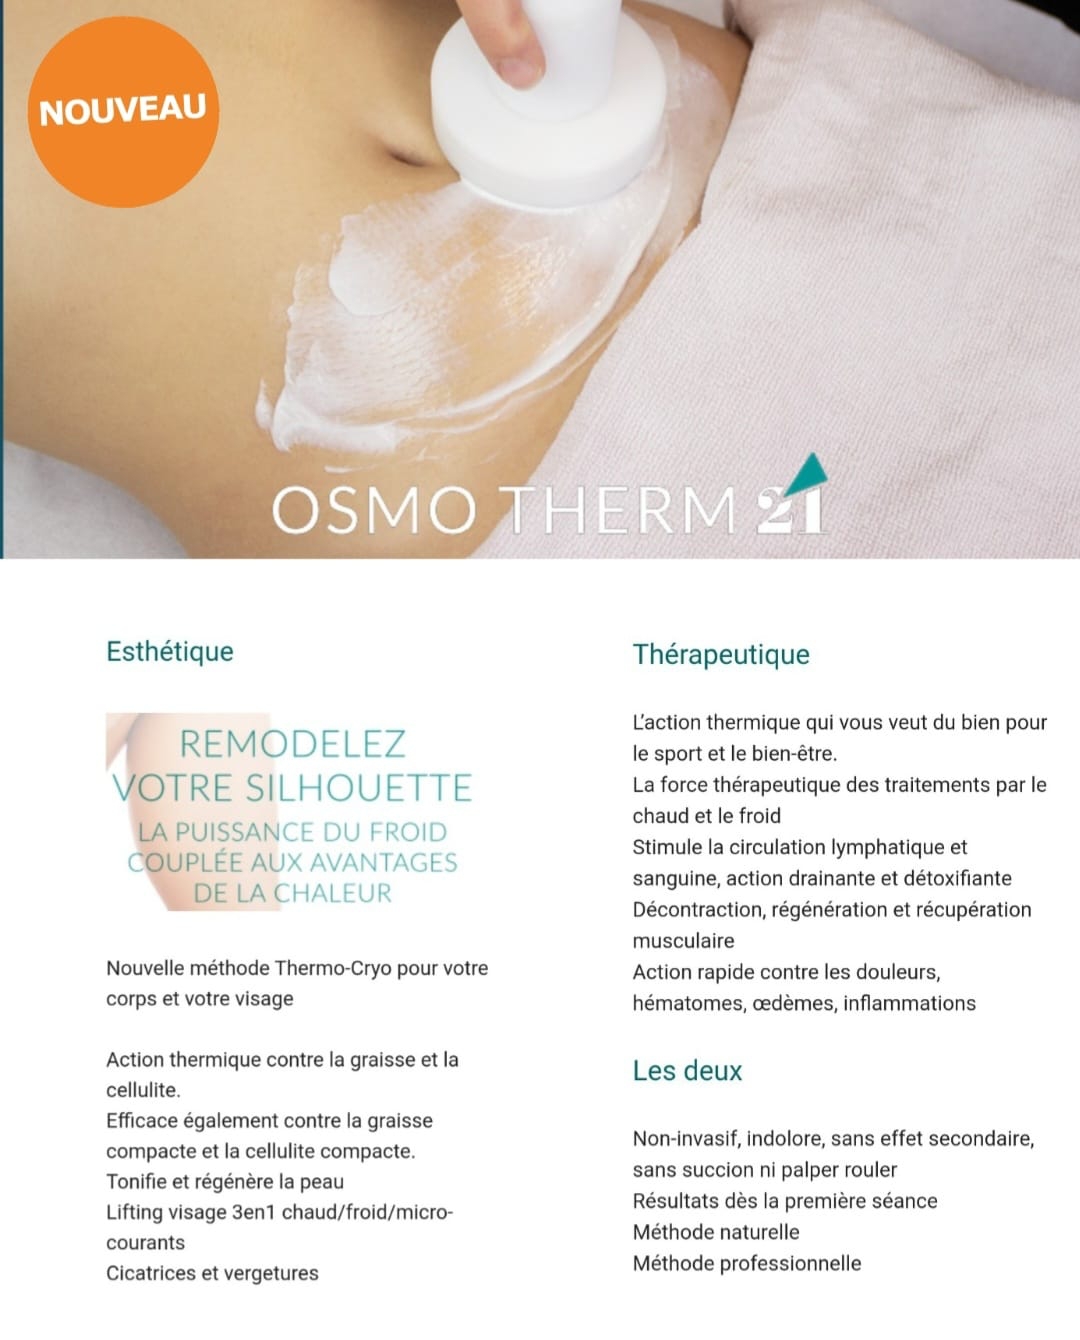 OSMO THERM 21